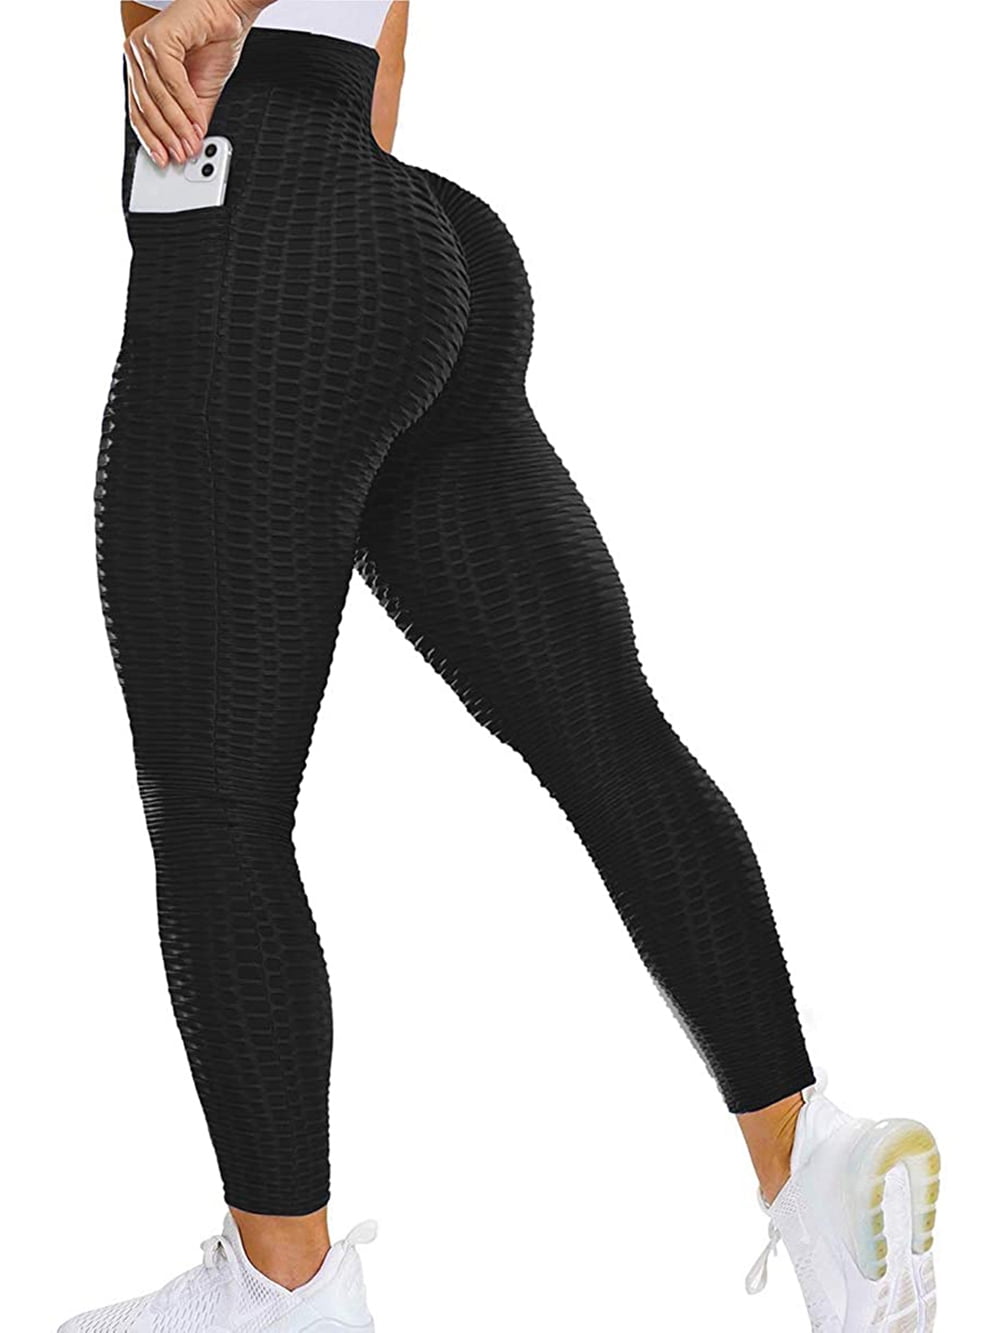 Womens High Waist Yoga Pants Anti-Cellulite Leggings Ruched Gym Sport Activewear